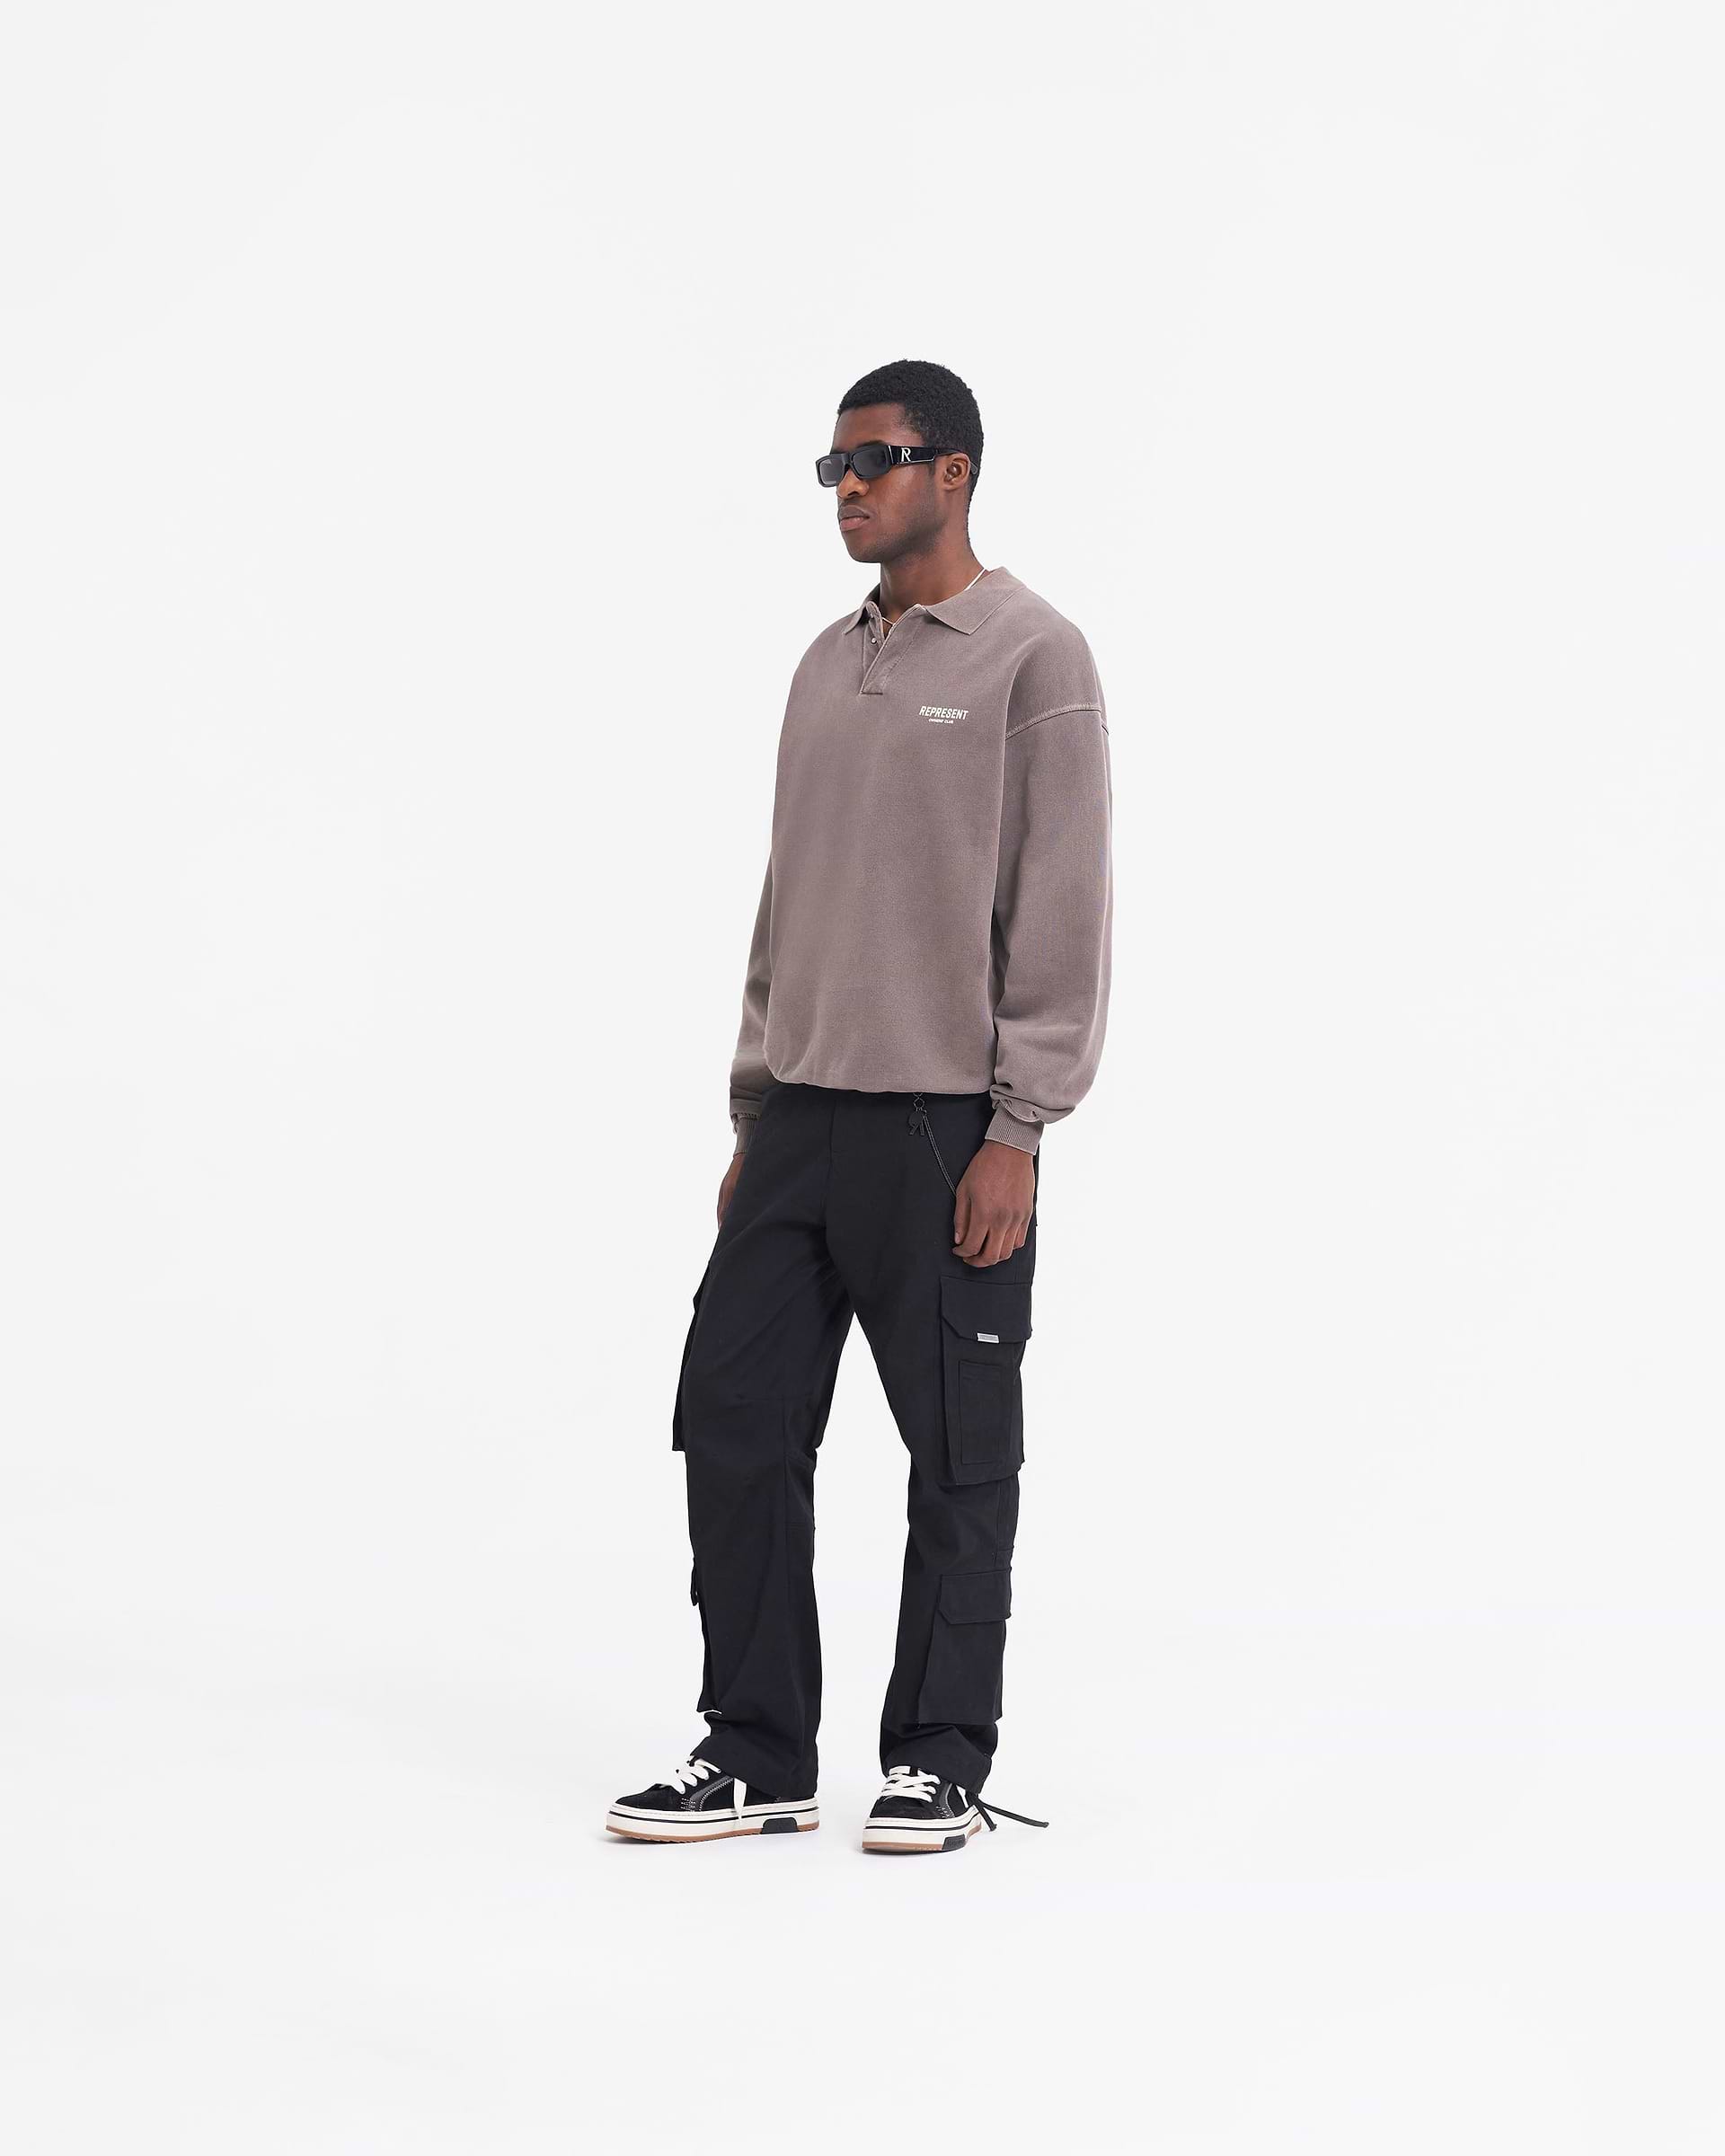 Owners' Club Long Sleeve Polo Sweater | Fog | REPRESENT CLO